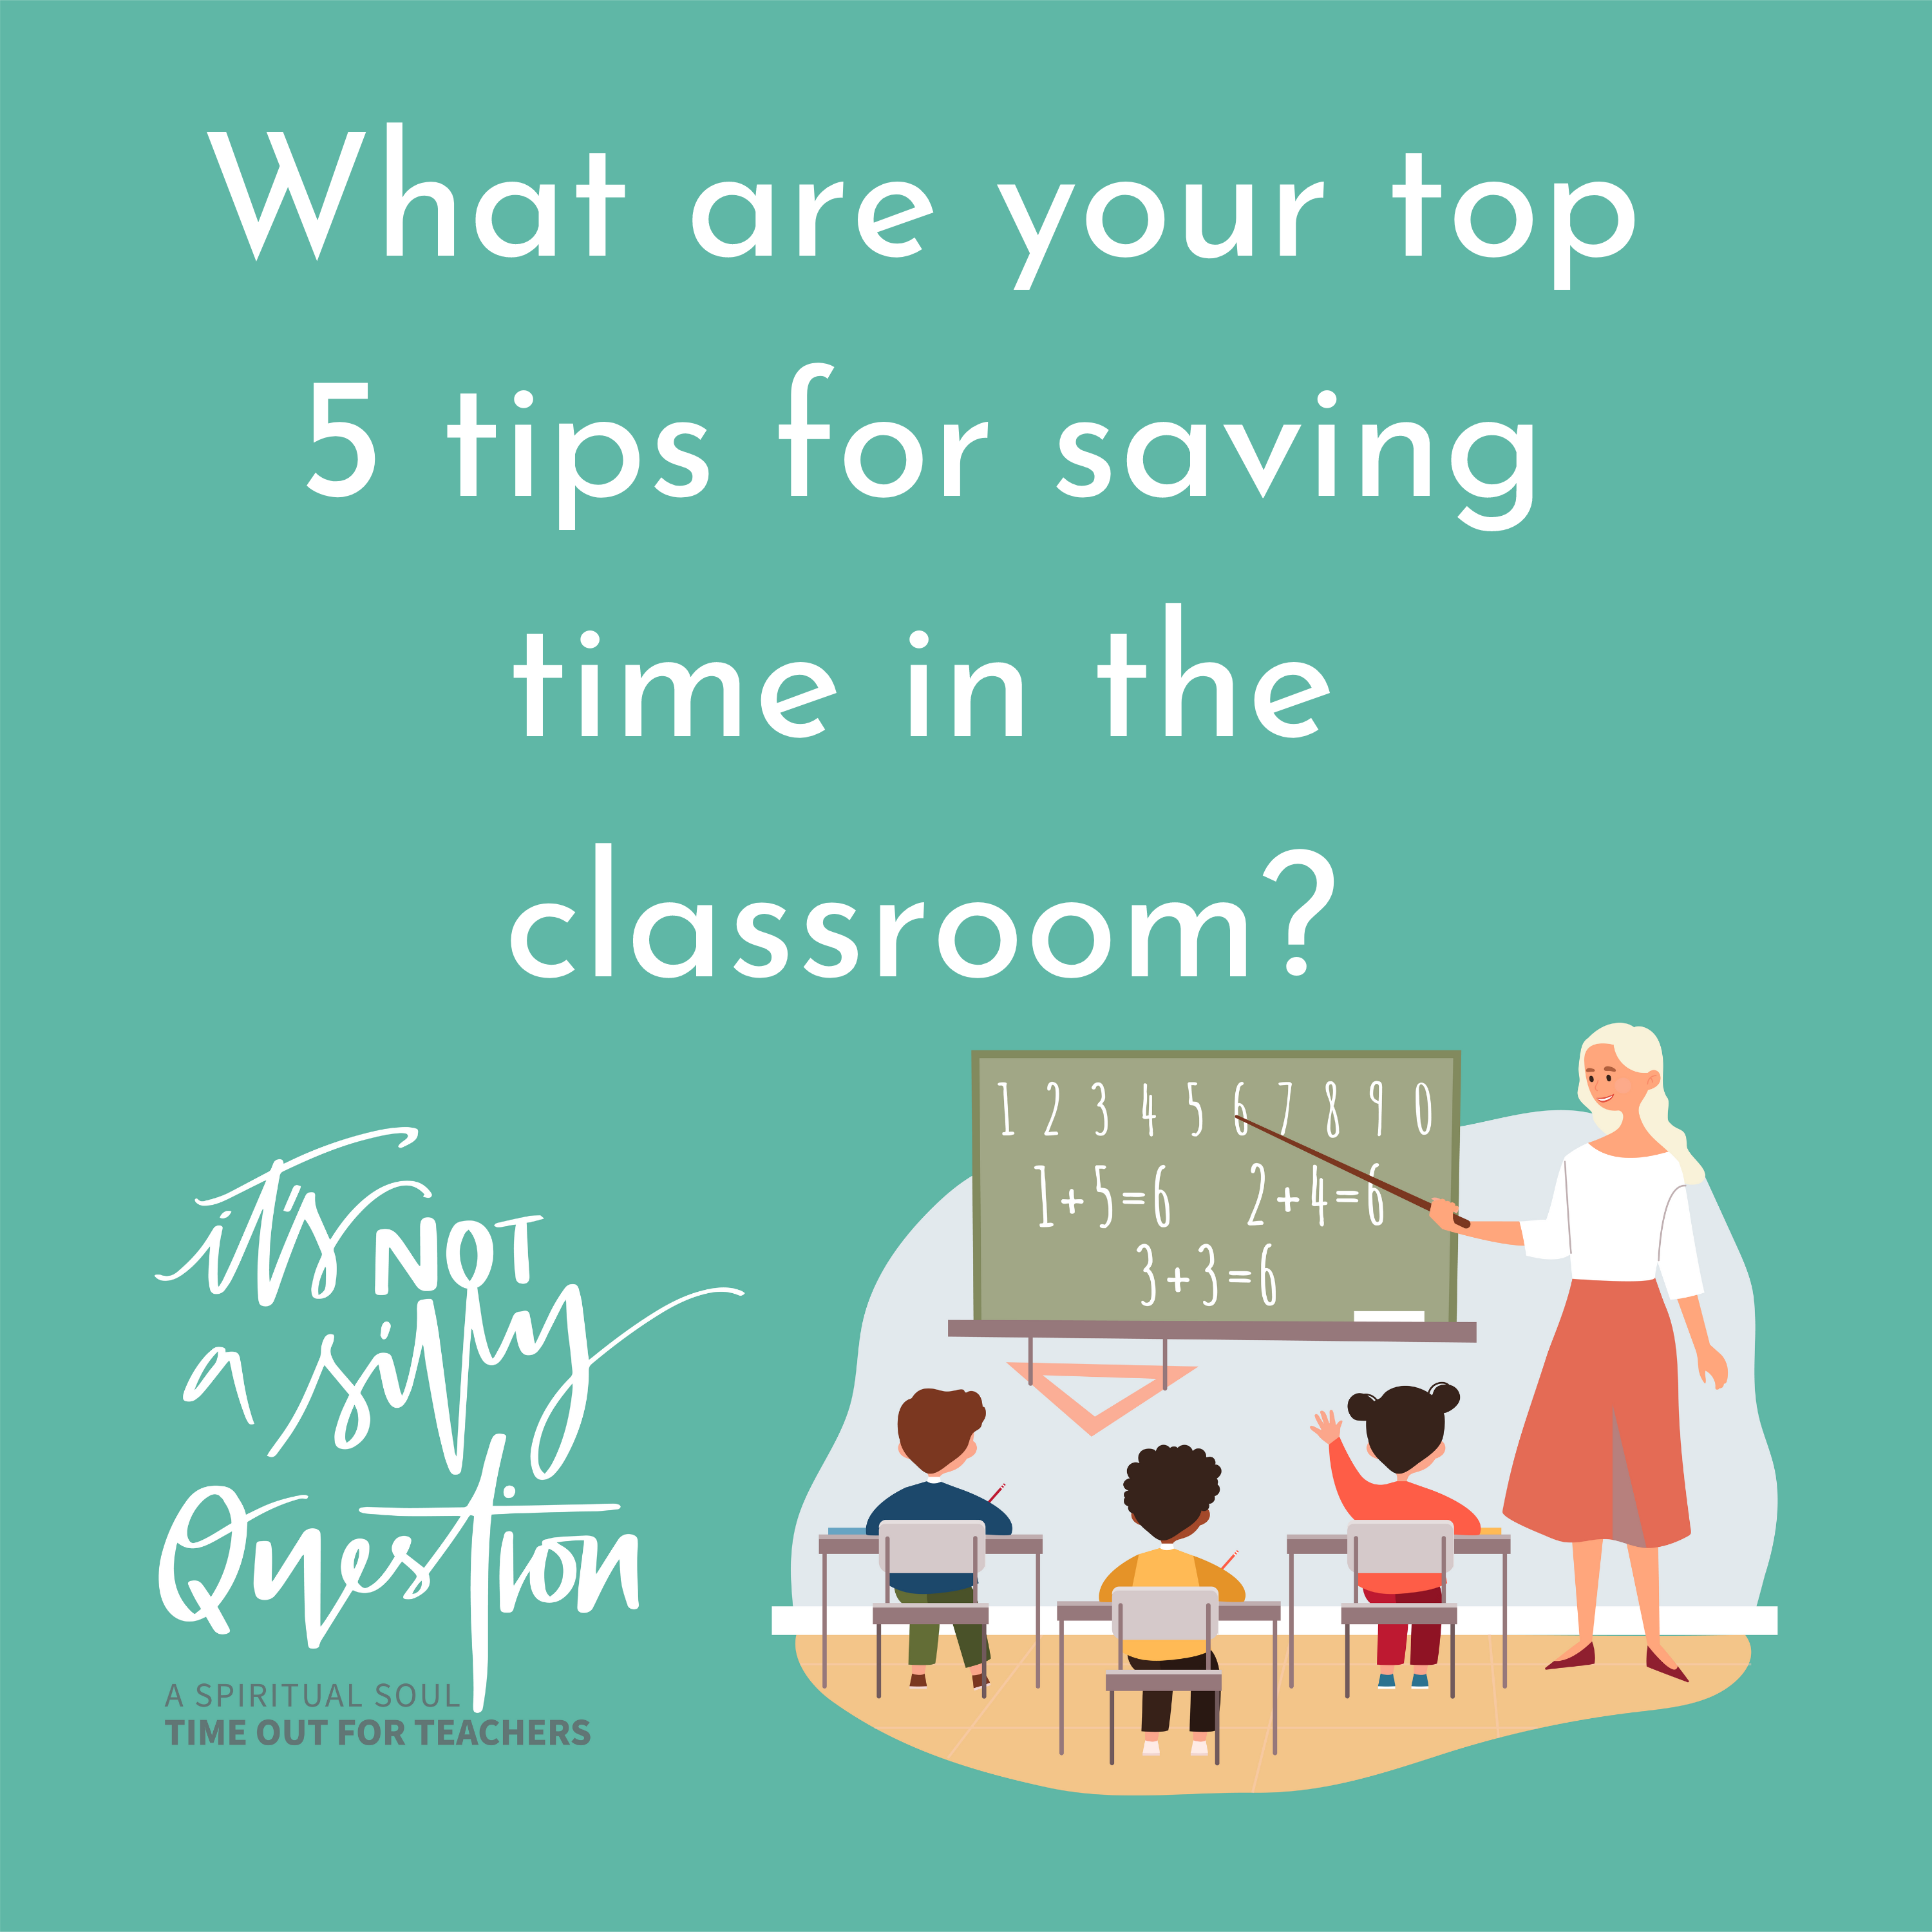 What are your top 5 tips for saving time in the classroom?